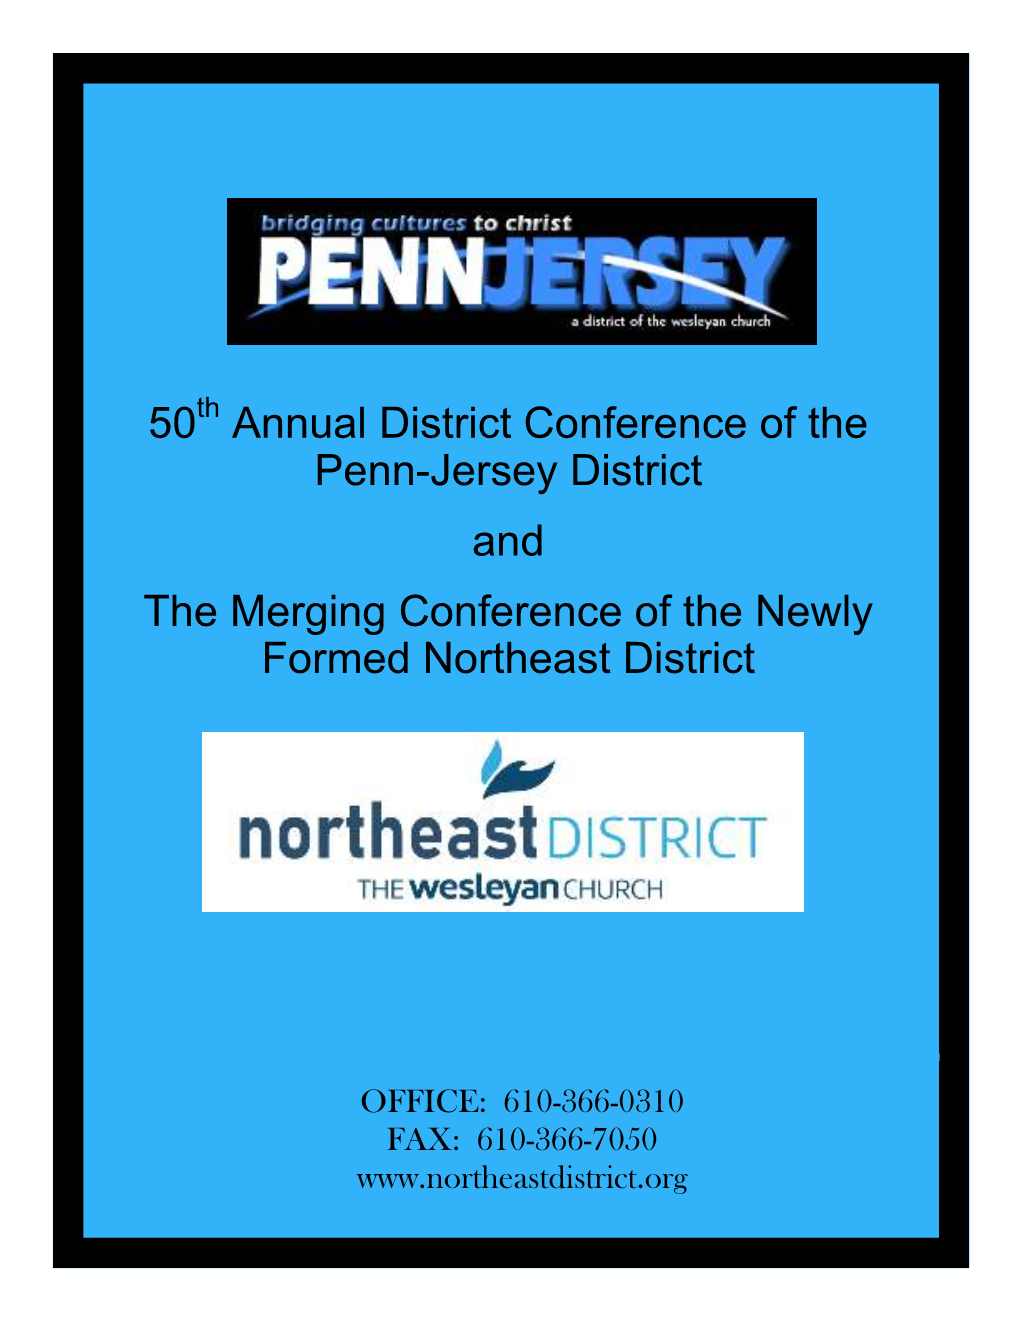 50 Annual District Conference of the Penn-Jersey District and The